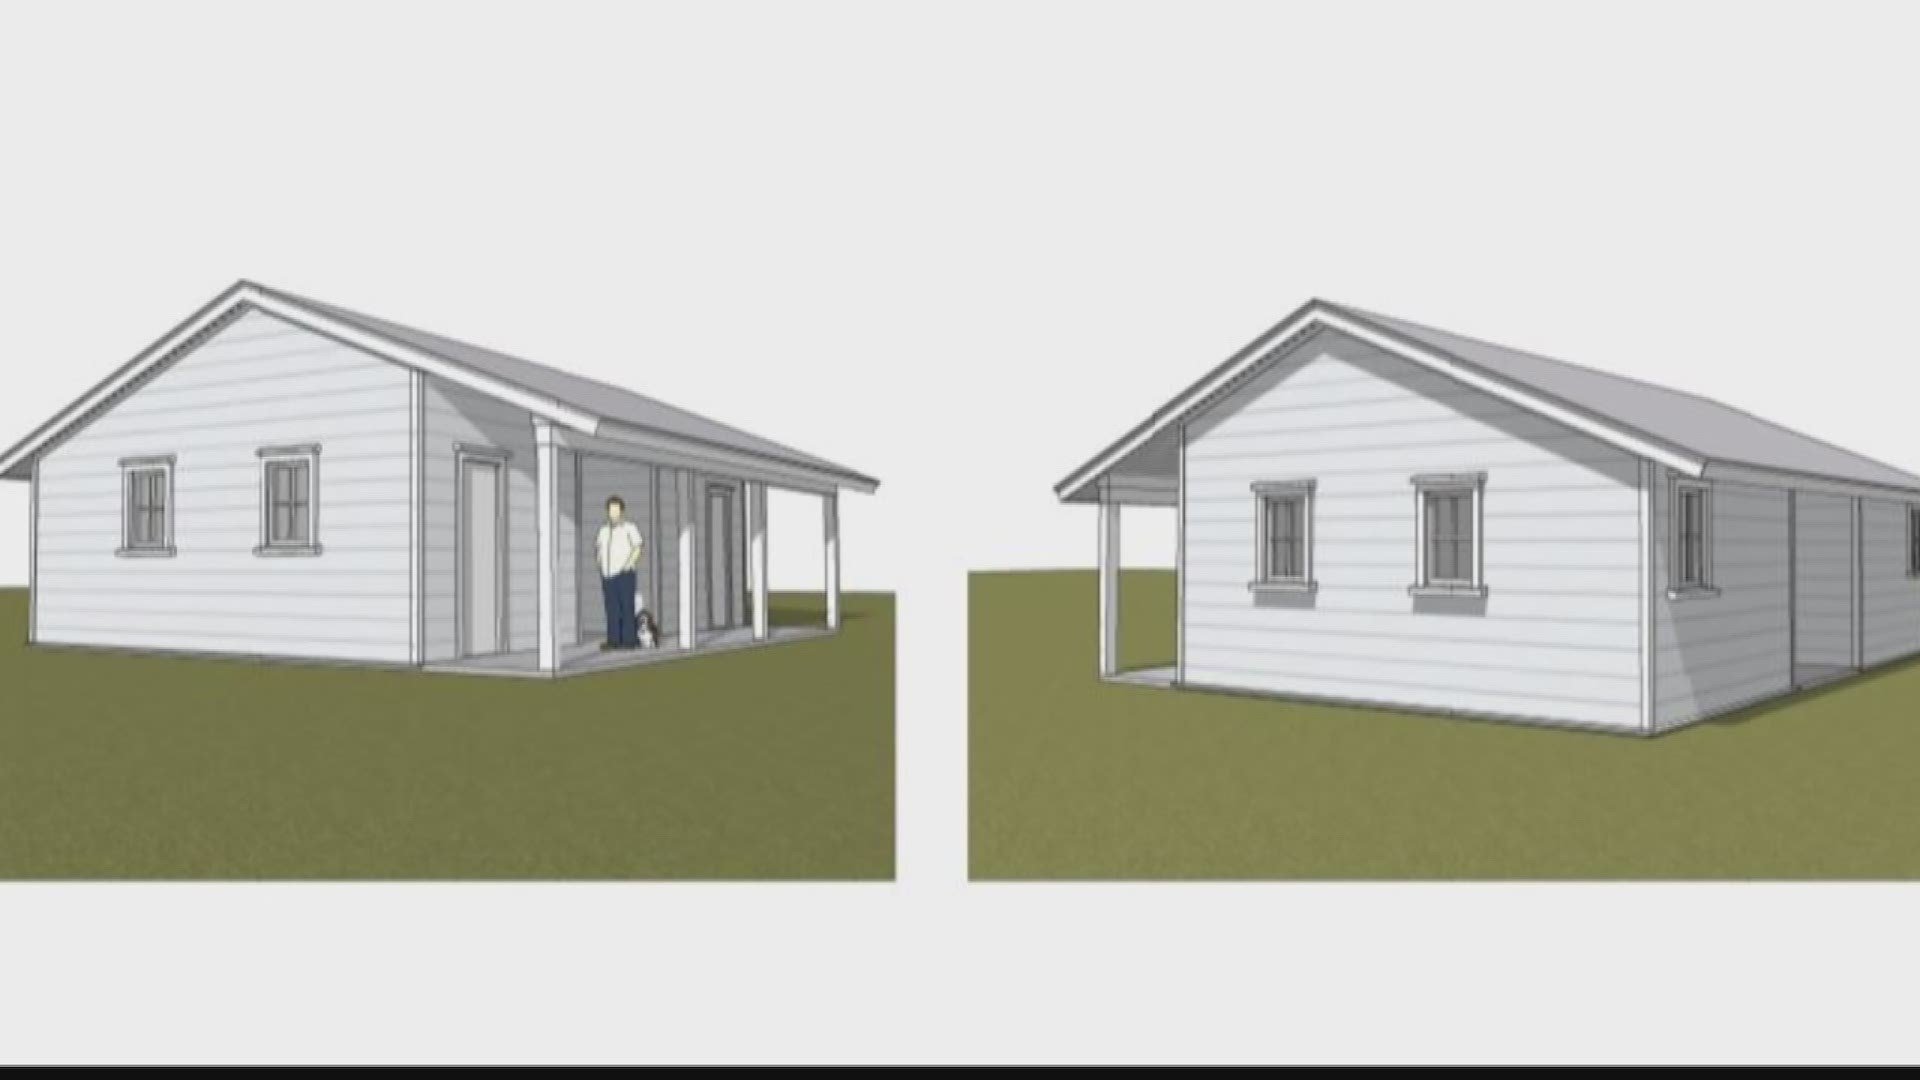 Anne Stembler, the founder of Hand in Hand of Glynn, Inc. is spearheading the effort to build 60 tiny homes in Brunswick.